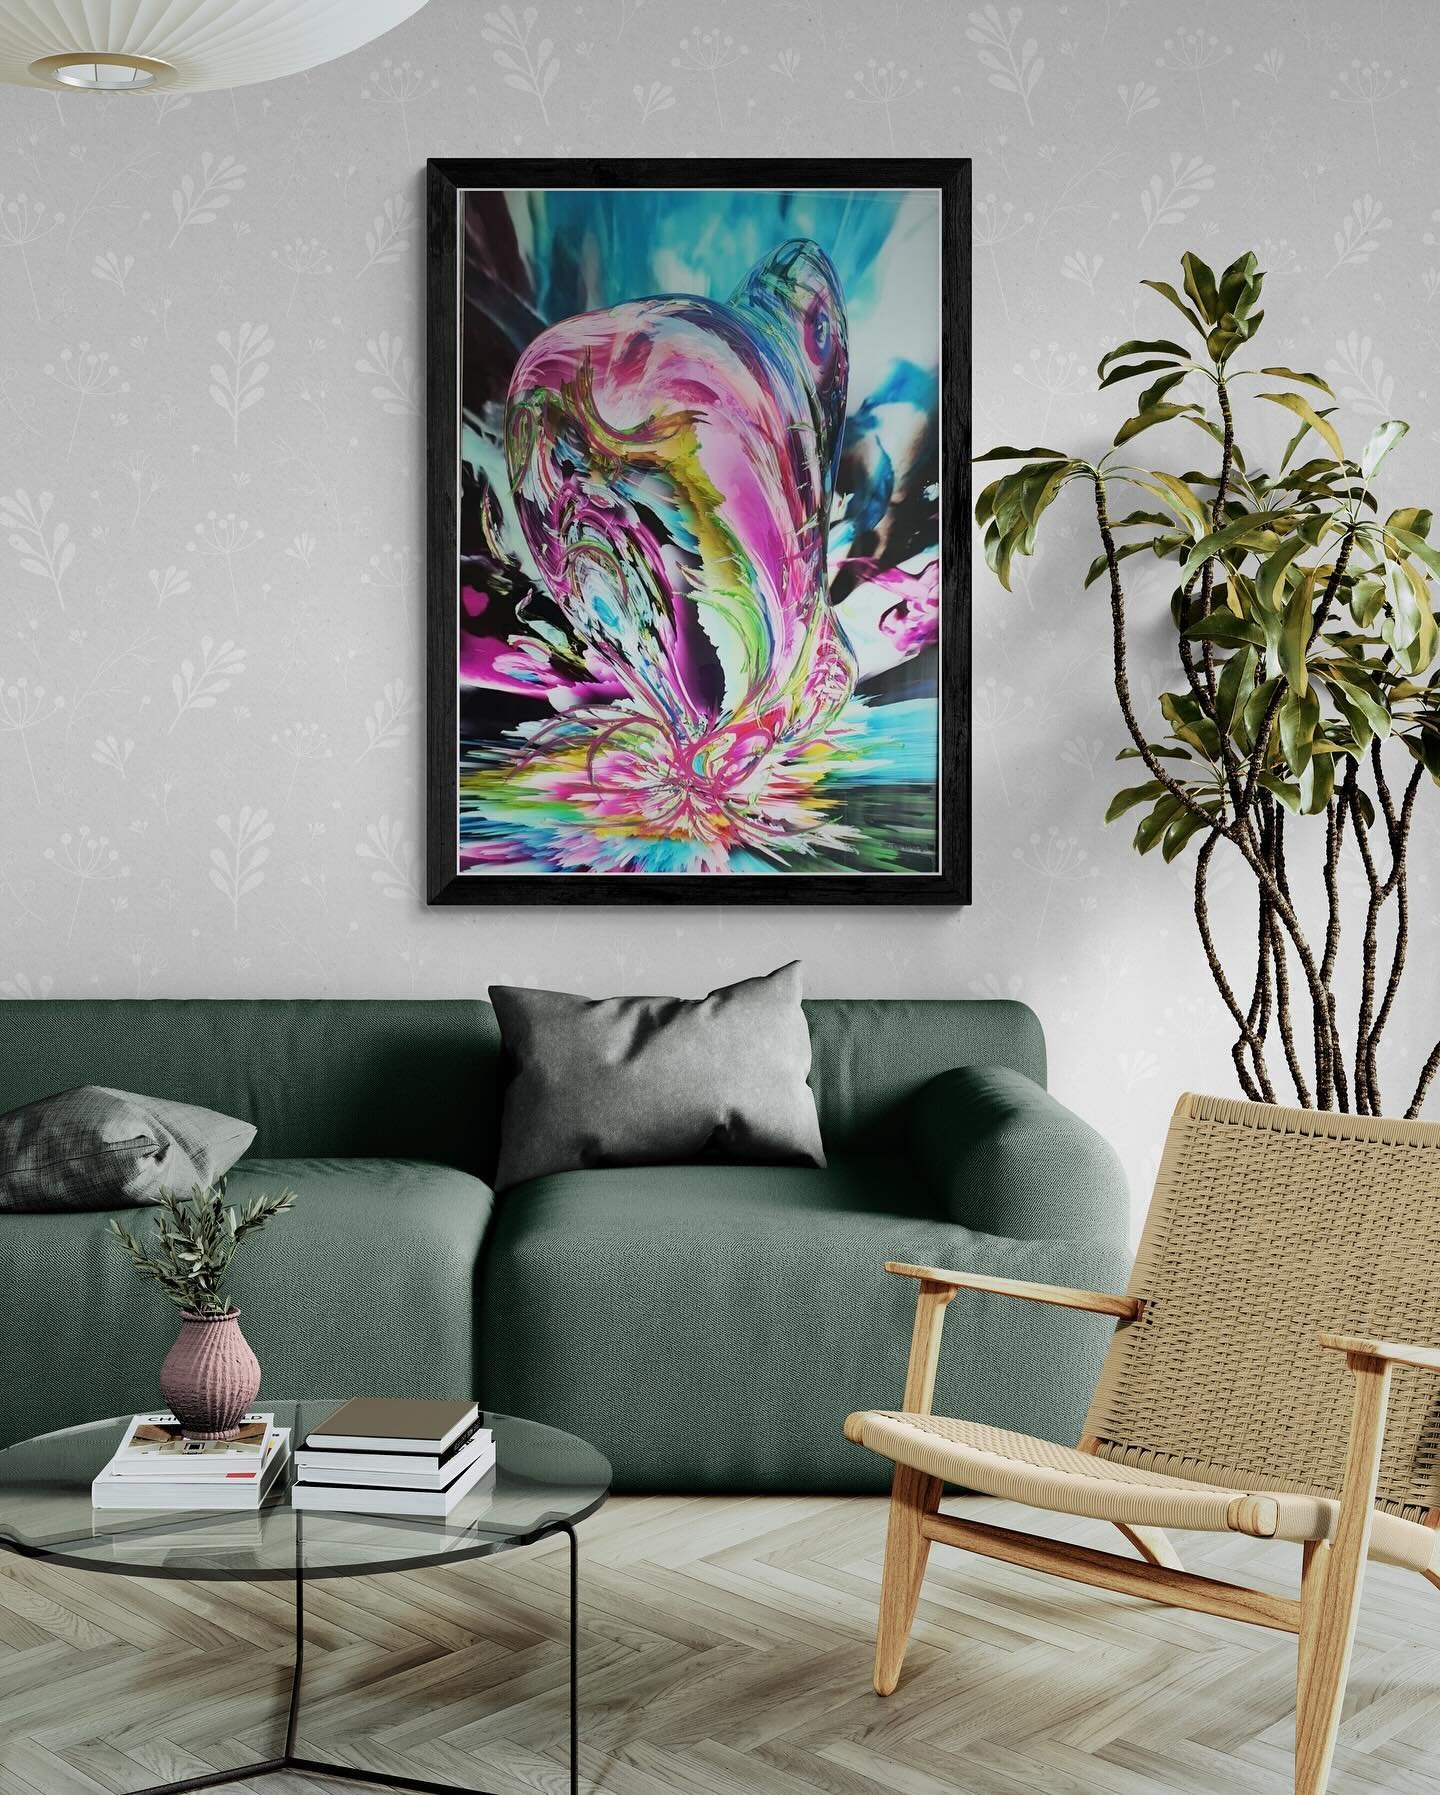 Available #contemporarypainting #anqi #melekanqi 
From Ethereal Sensations series

#mixedmedia #asianartist #artconsultant #blossoming #chineseculture #taiwaneseartist #artbaselhk #taipeidangdai #artcentralhk #kiafseoul #visualartists #abstractpainti